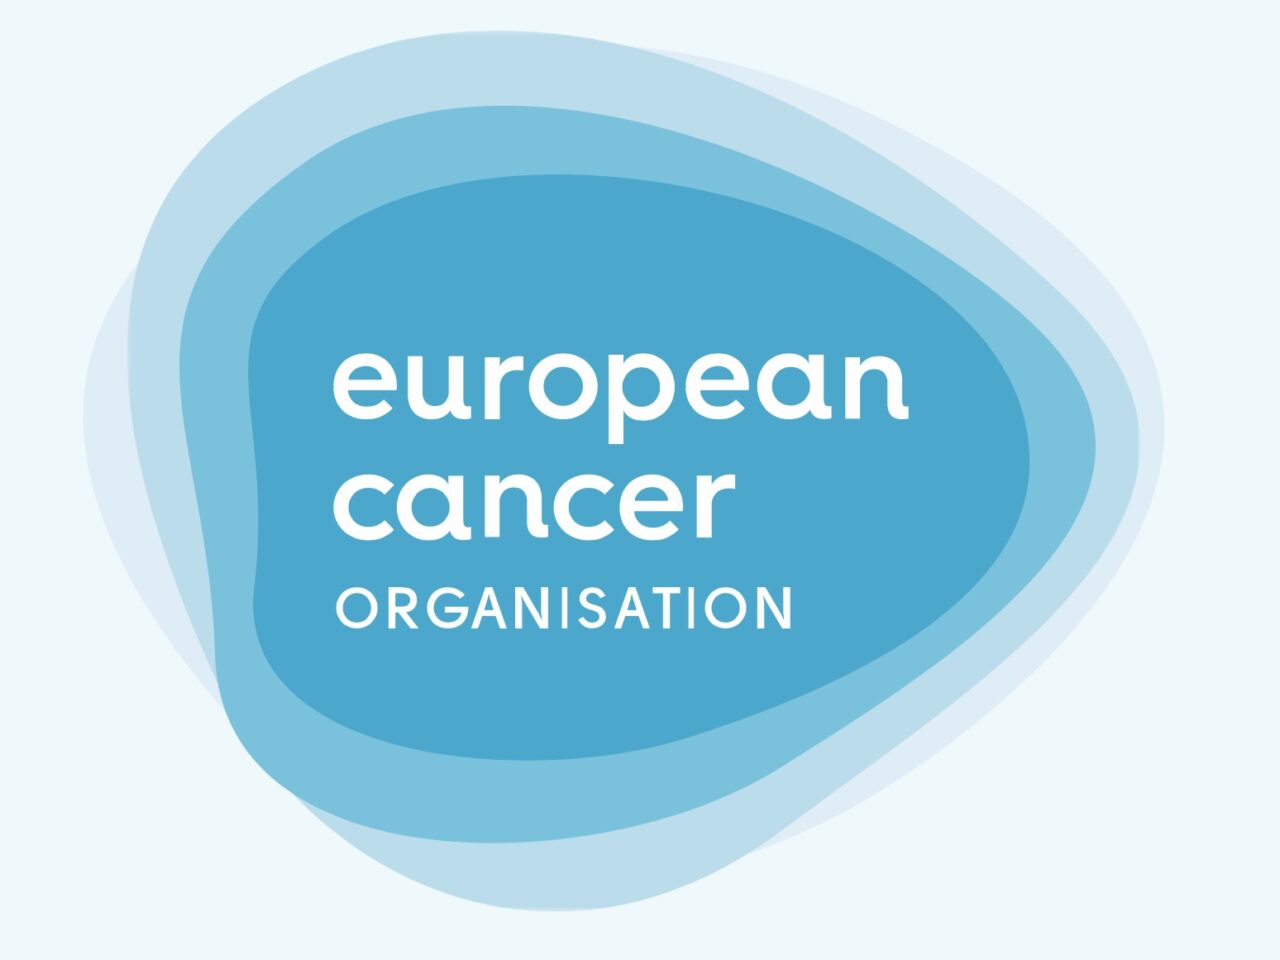 A Call For Better Care For Patients With Rare Cancers – European Cancer Organisation